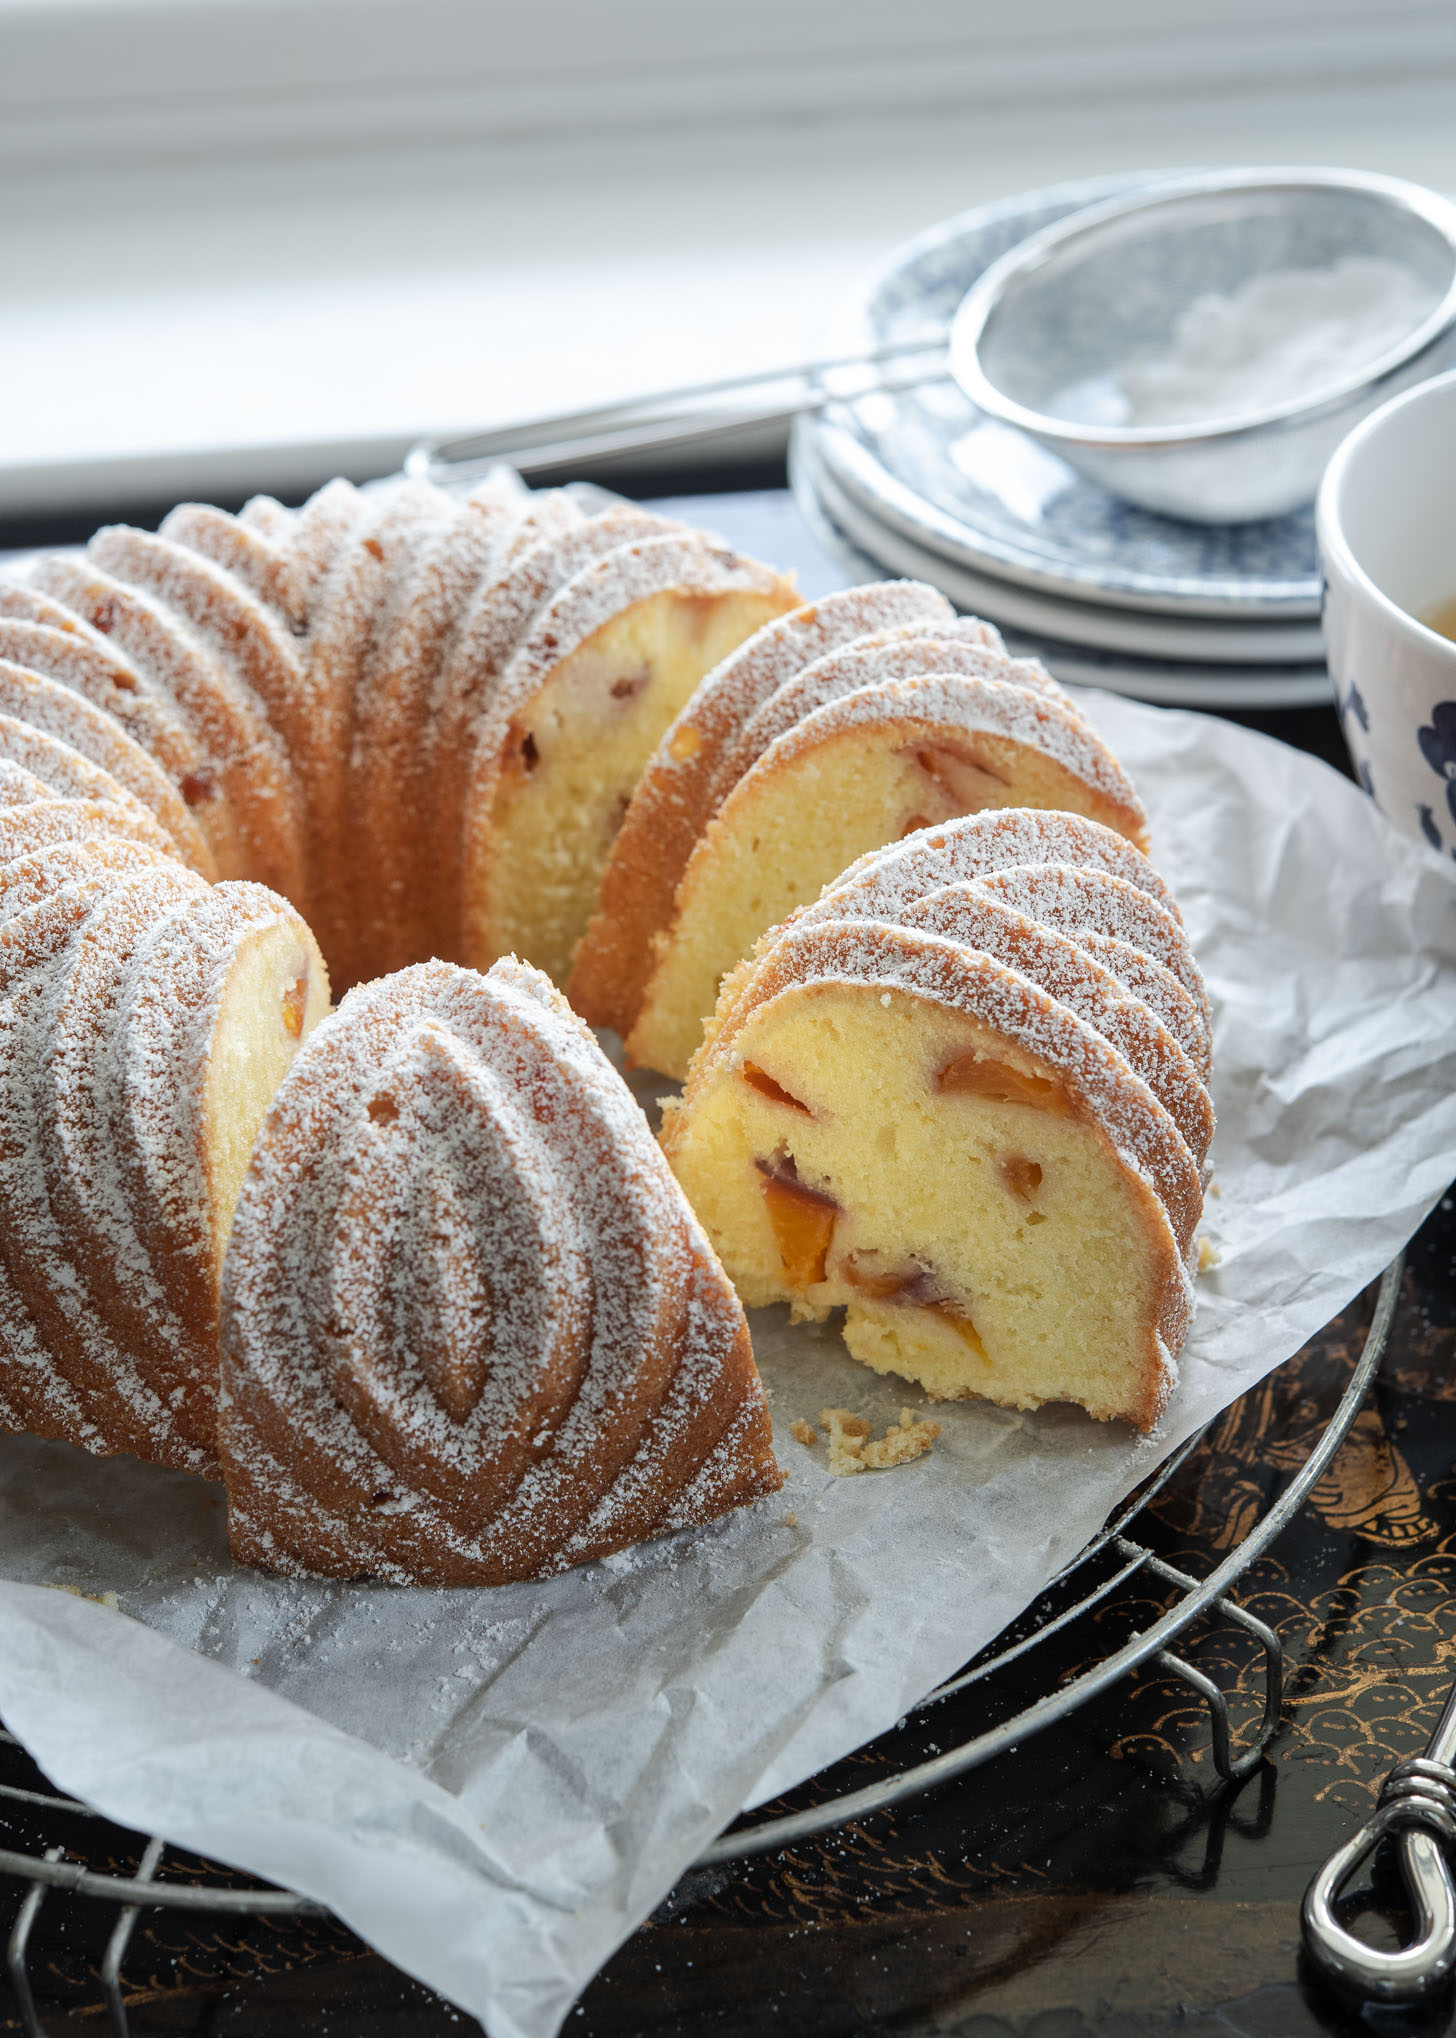 Peach pound cake baked in a bundt pan.